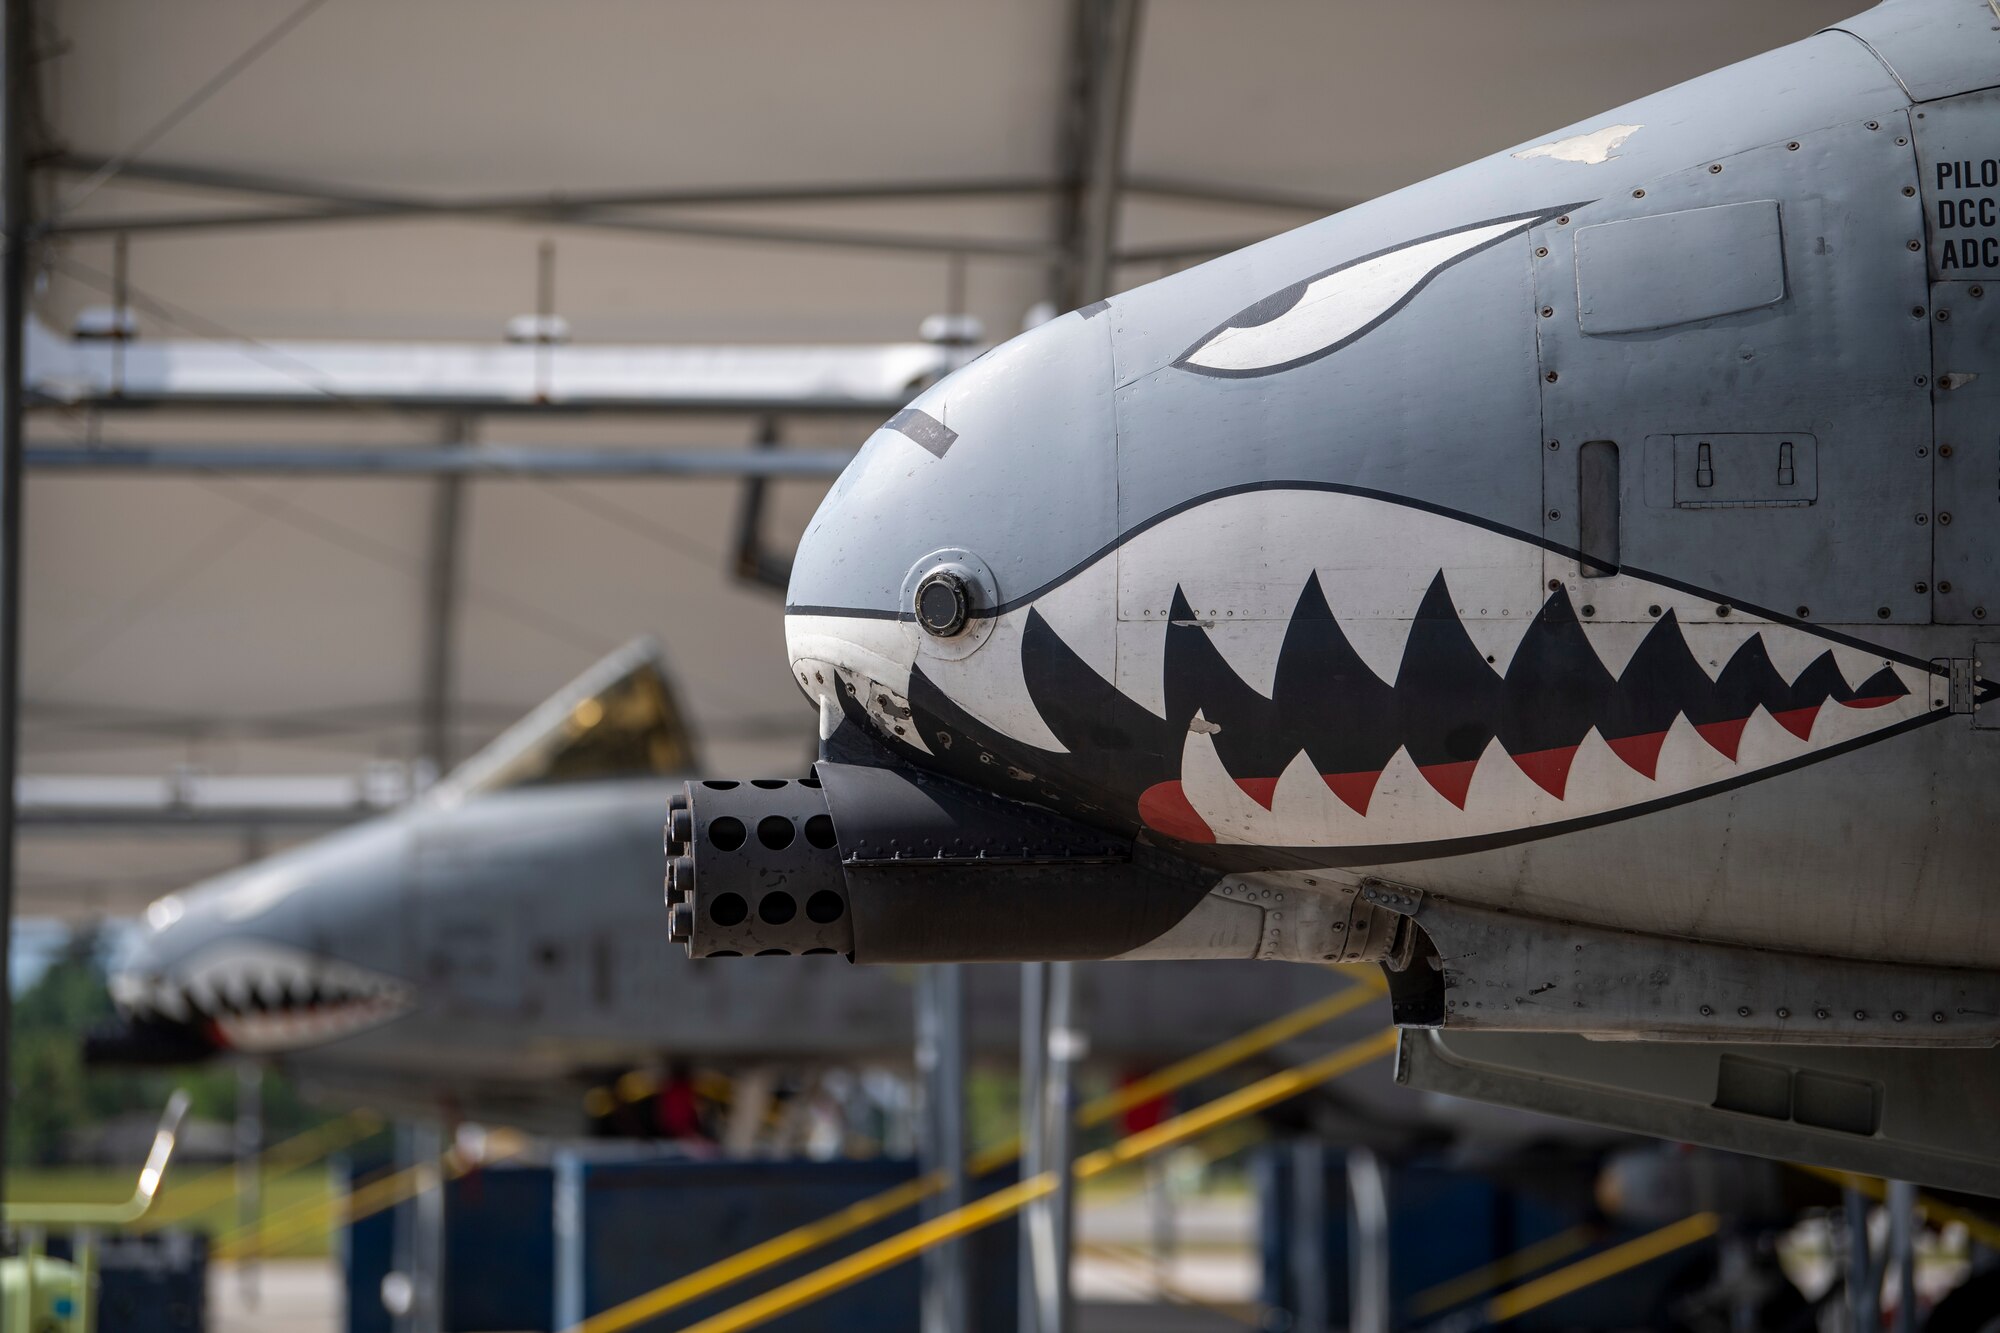 Multiple A-10C Thunderbolt II aircraft sit in preparation for take-off during Exercise Ready Tiger 24-1 at Moody Air Force Base, Georgia, April 9, 2024. A-10C aircraft have excellent manoeuvrability at low airspeeds and altitude and are highly accurate weapons-delivery platforms. They can loiter near battle areas for extended periods and operate under 1,000-foot ceilings with 1.5-mile visibility. Their wide combat radius and short take-off and landing capability permit operations in and out of locations near front lines.  (U.S. Air Force photo by 2nd Lt. Benjamin Williams)